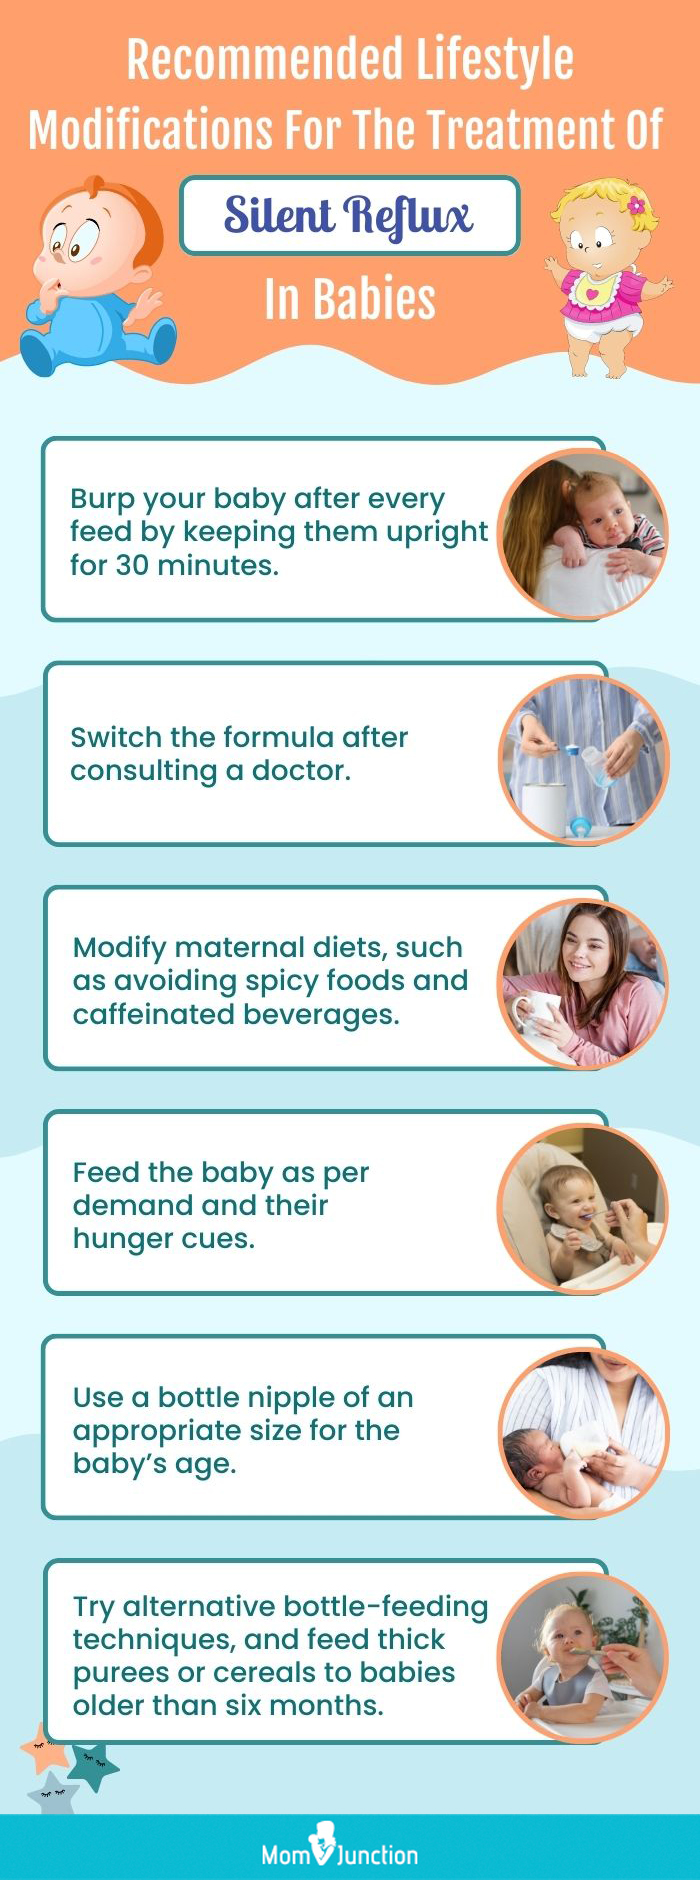 recommended lifestyle modifications for the treatment of silent reflux in babies (infographic)